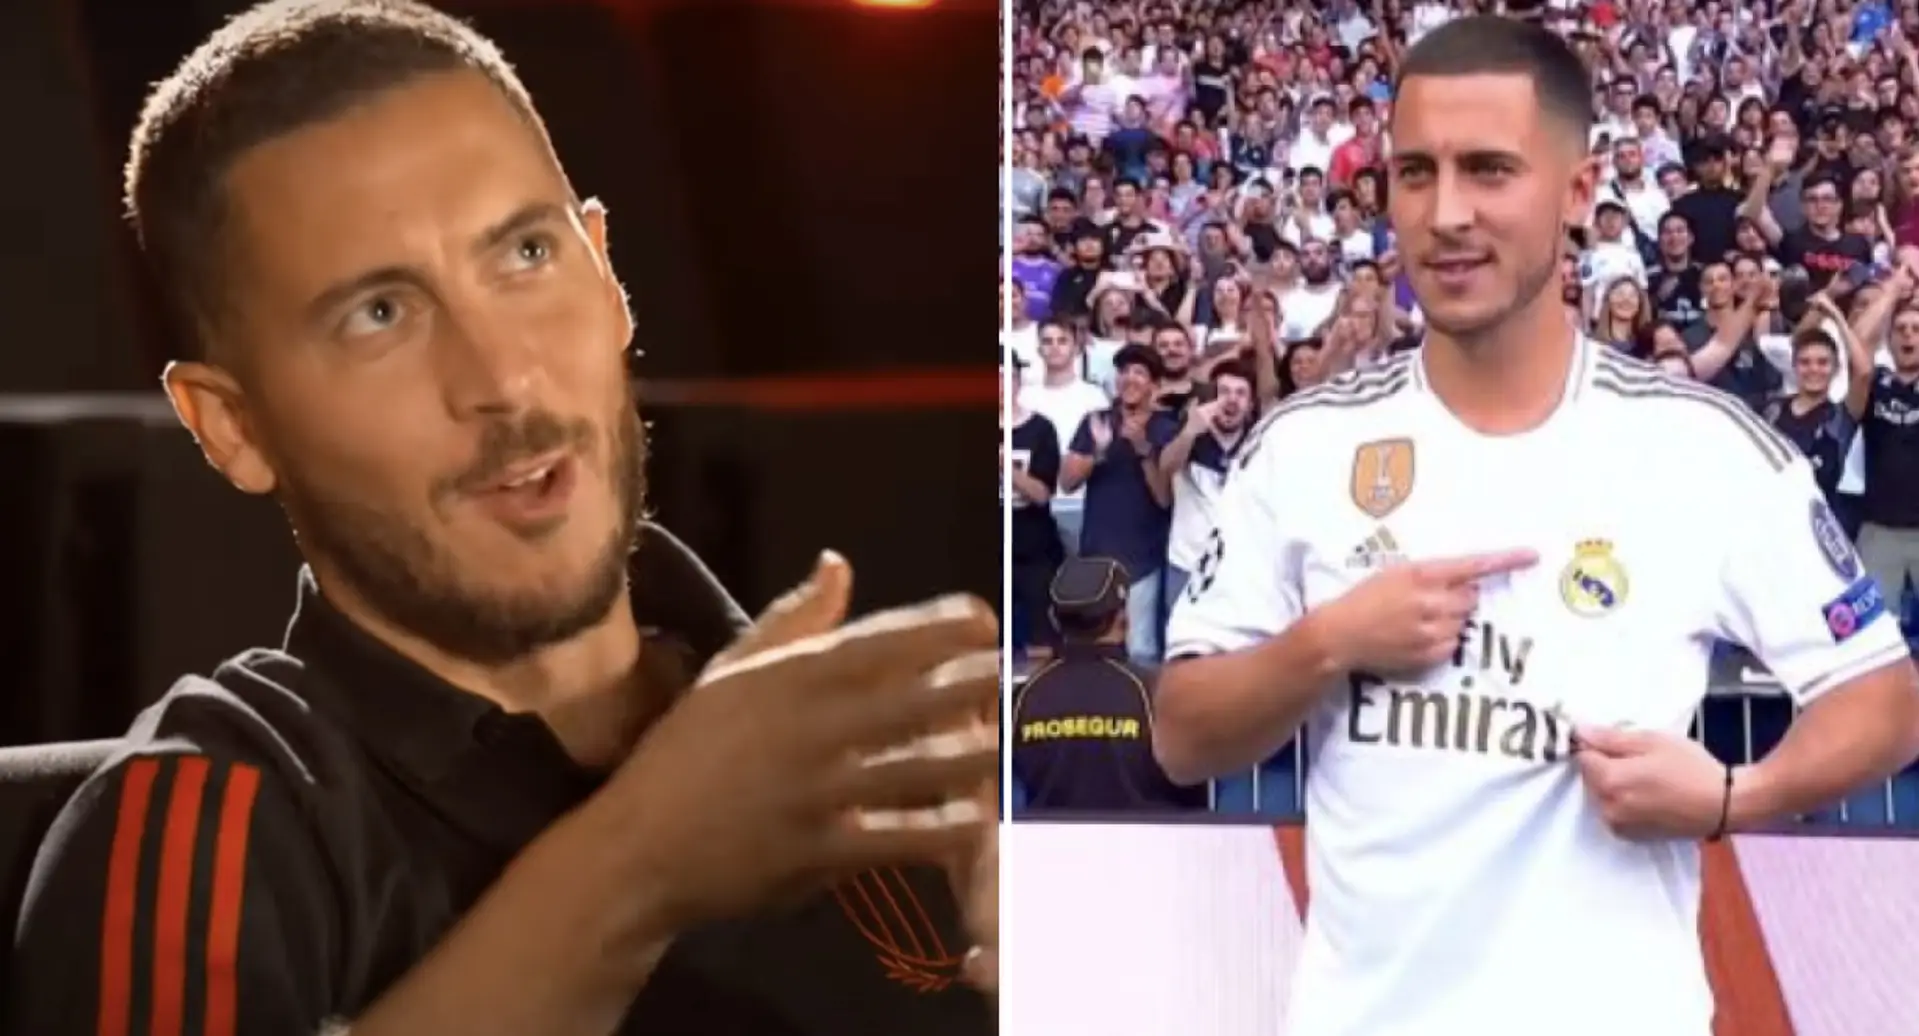 'It's not like me': Eden Hazard breaks silence on what went wrong for him at Real Madrid